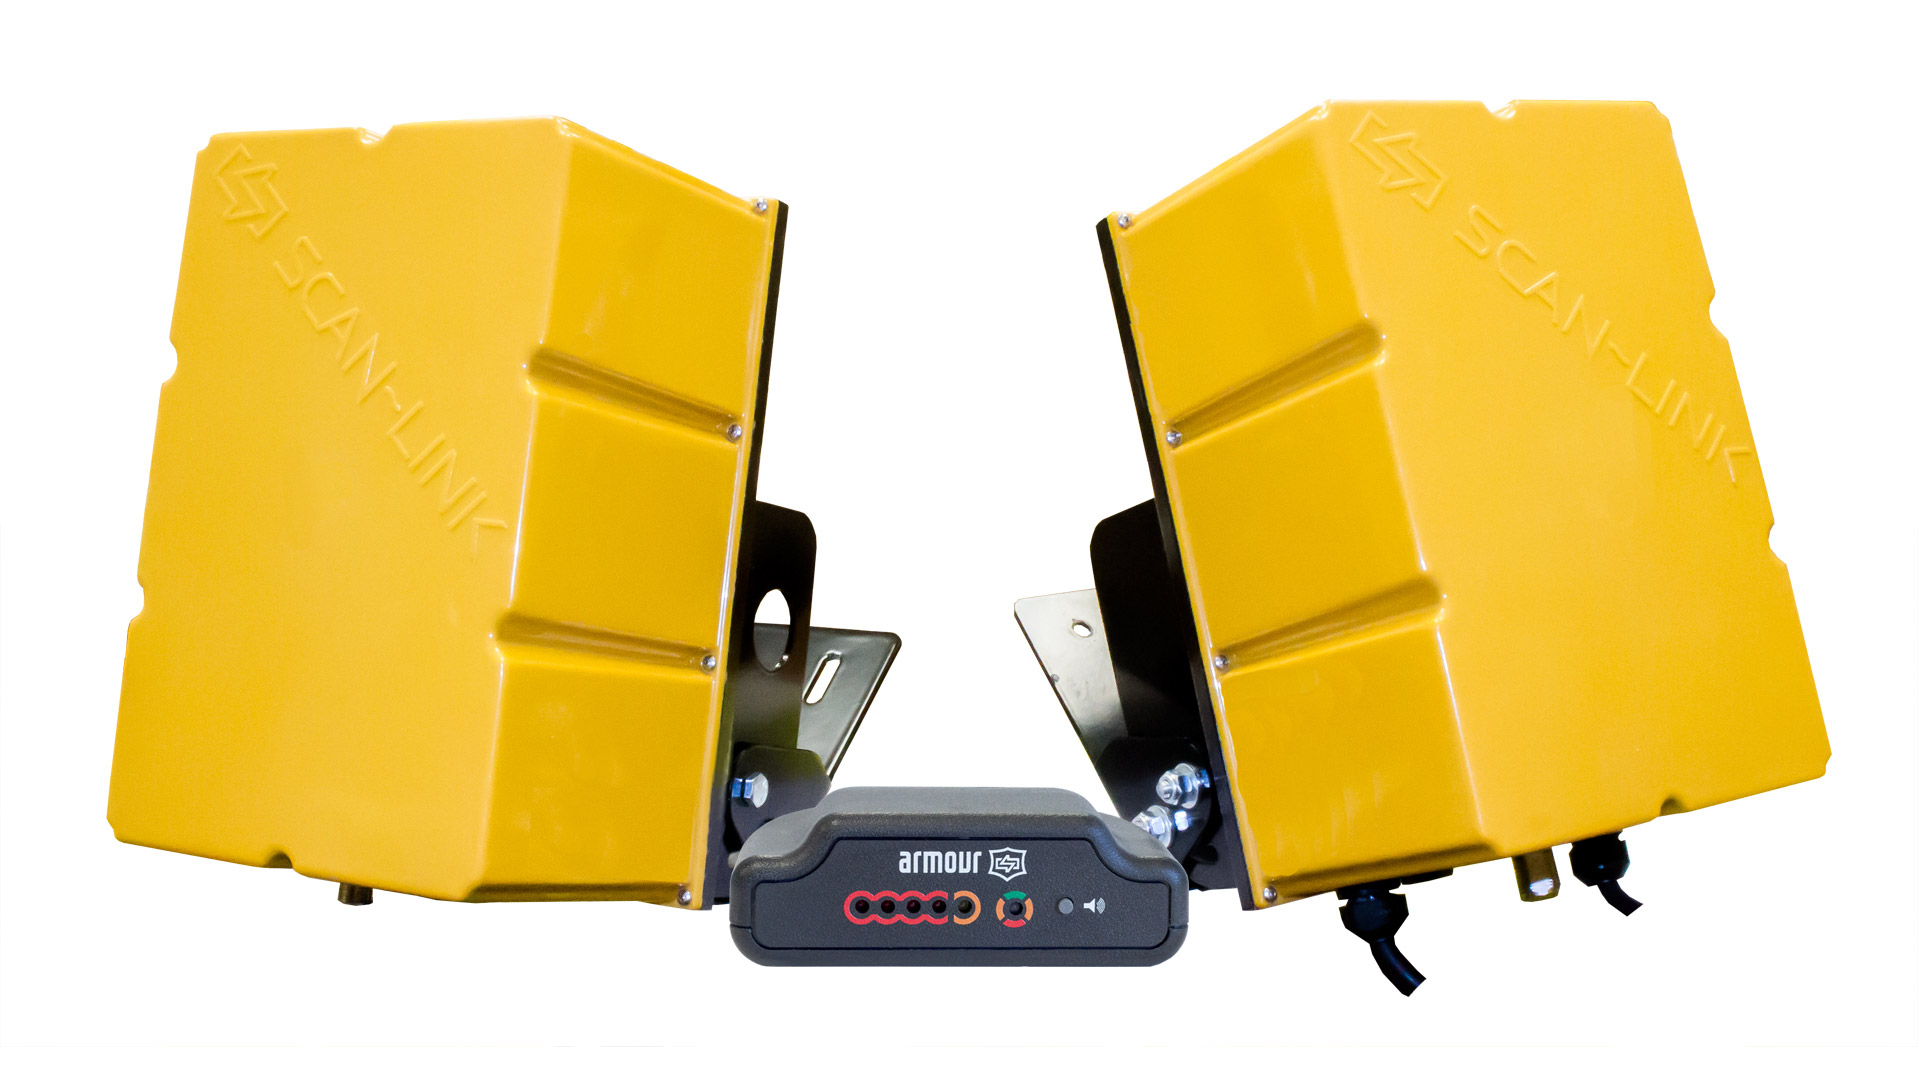 Passive RFID Armour System Dual Node Proximity Back Up used to detect workers on a jobsite in the danger back up zone of heavy mobile equipment